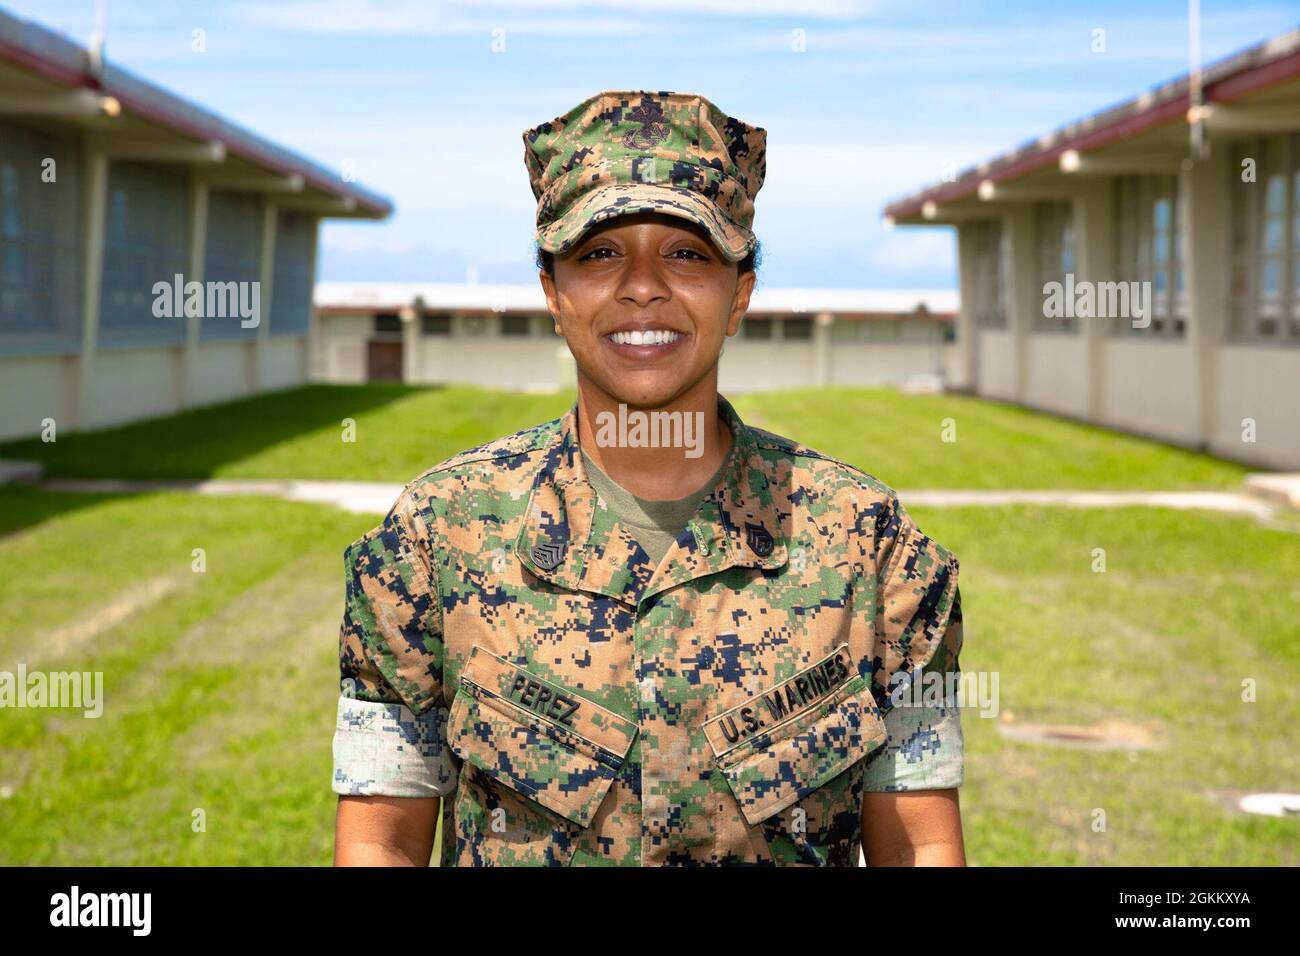 U.S. Marine Corps Staff Sgt. Aliyanna Perez, the battle center staff noncommissioned officer-in-charge, III Marine Expeditionary Force, poses for a photo on Camp Courtney, Okinawa, Japan, May 20, 2021.     “At the battle center, I started out as a watch chief,” said Perez. “The watch chief tracks all the incidents and current operations, and maintains cognizance of pretty much anything and everything within the MEF and its subordinate commands.”     Perez explained that the battle center is an information hub used for critical meetings and tracking crucial data throughout the Indo-Pacific regi Stock Photo